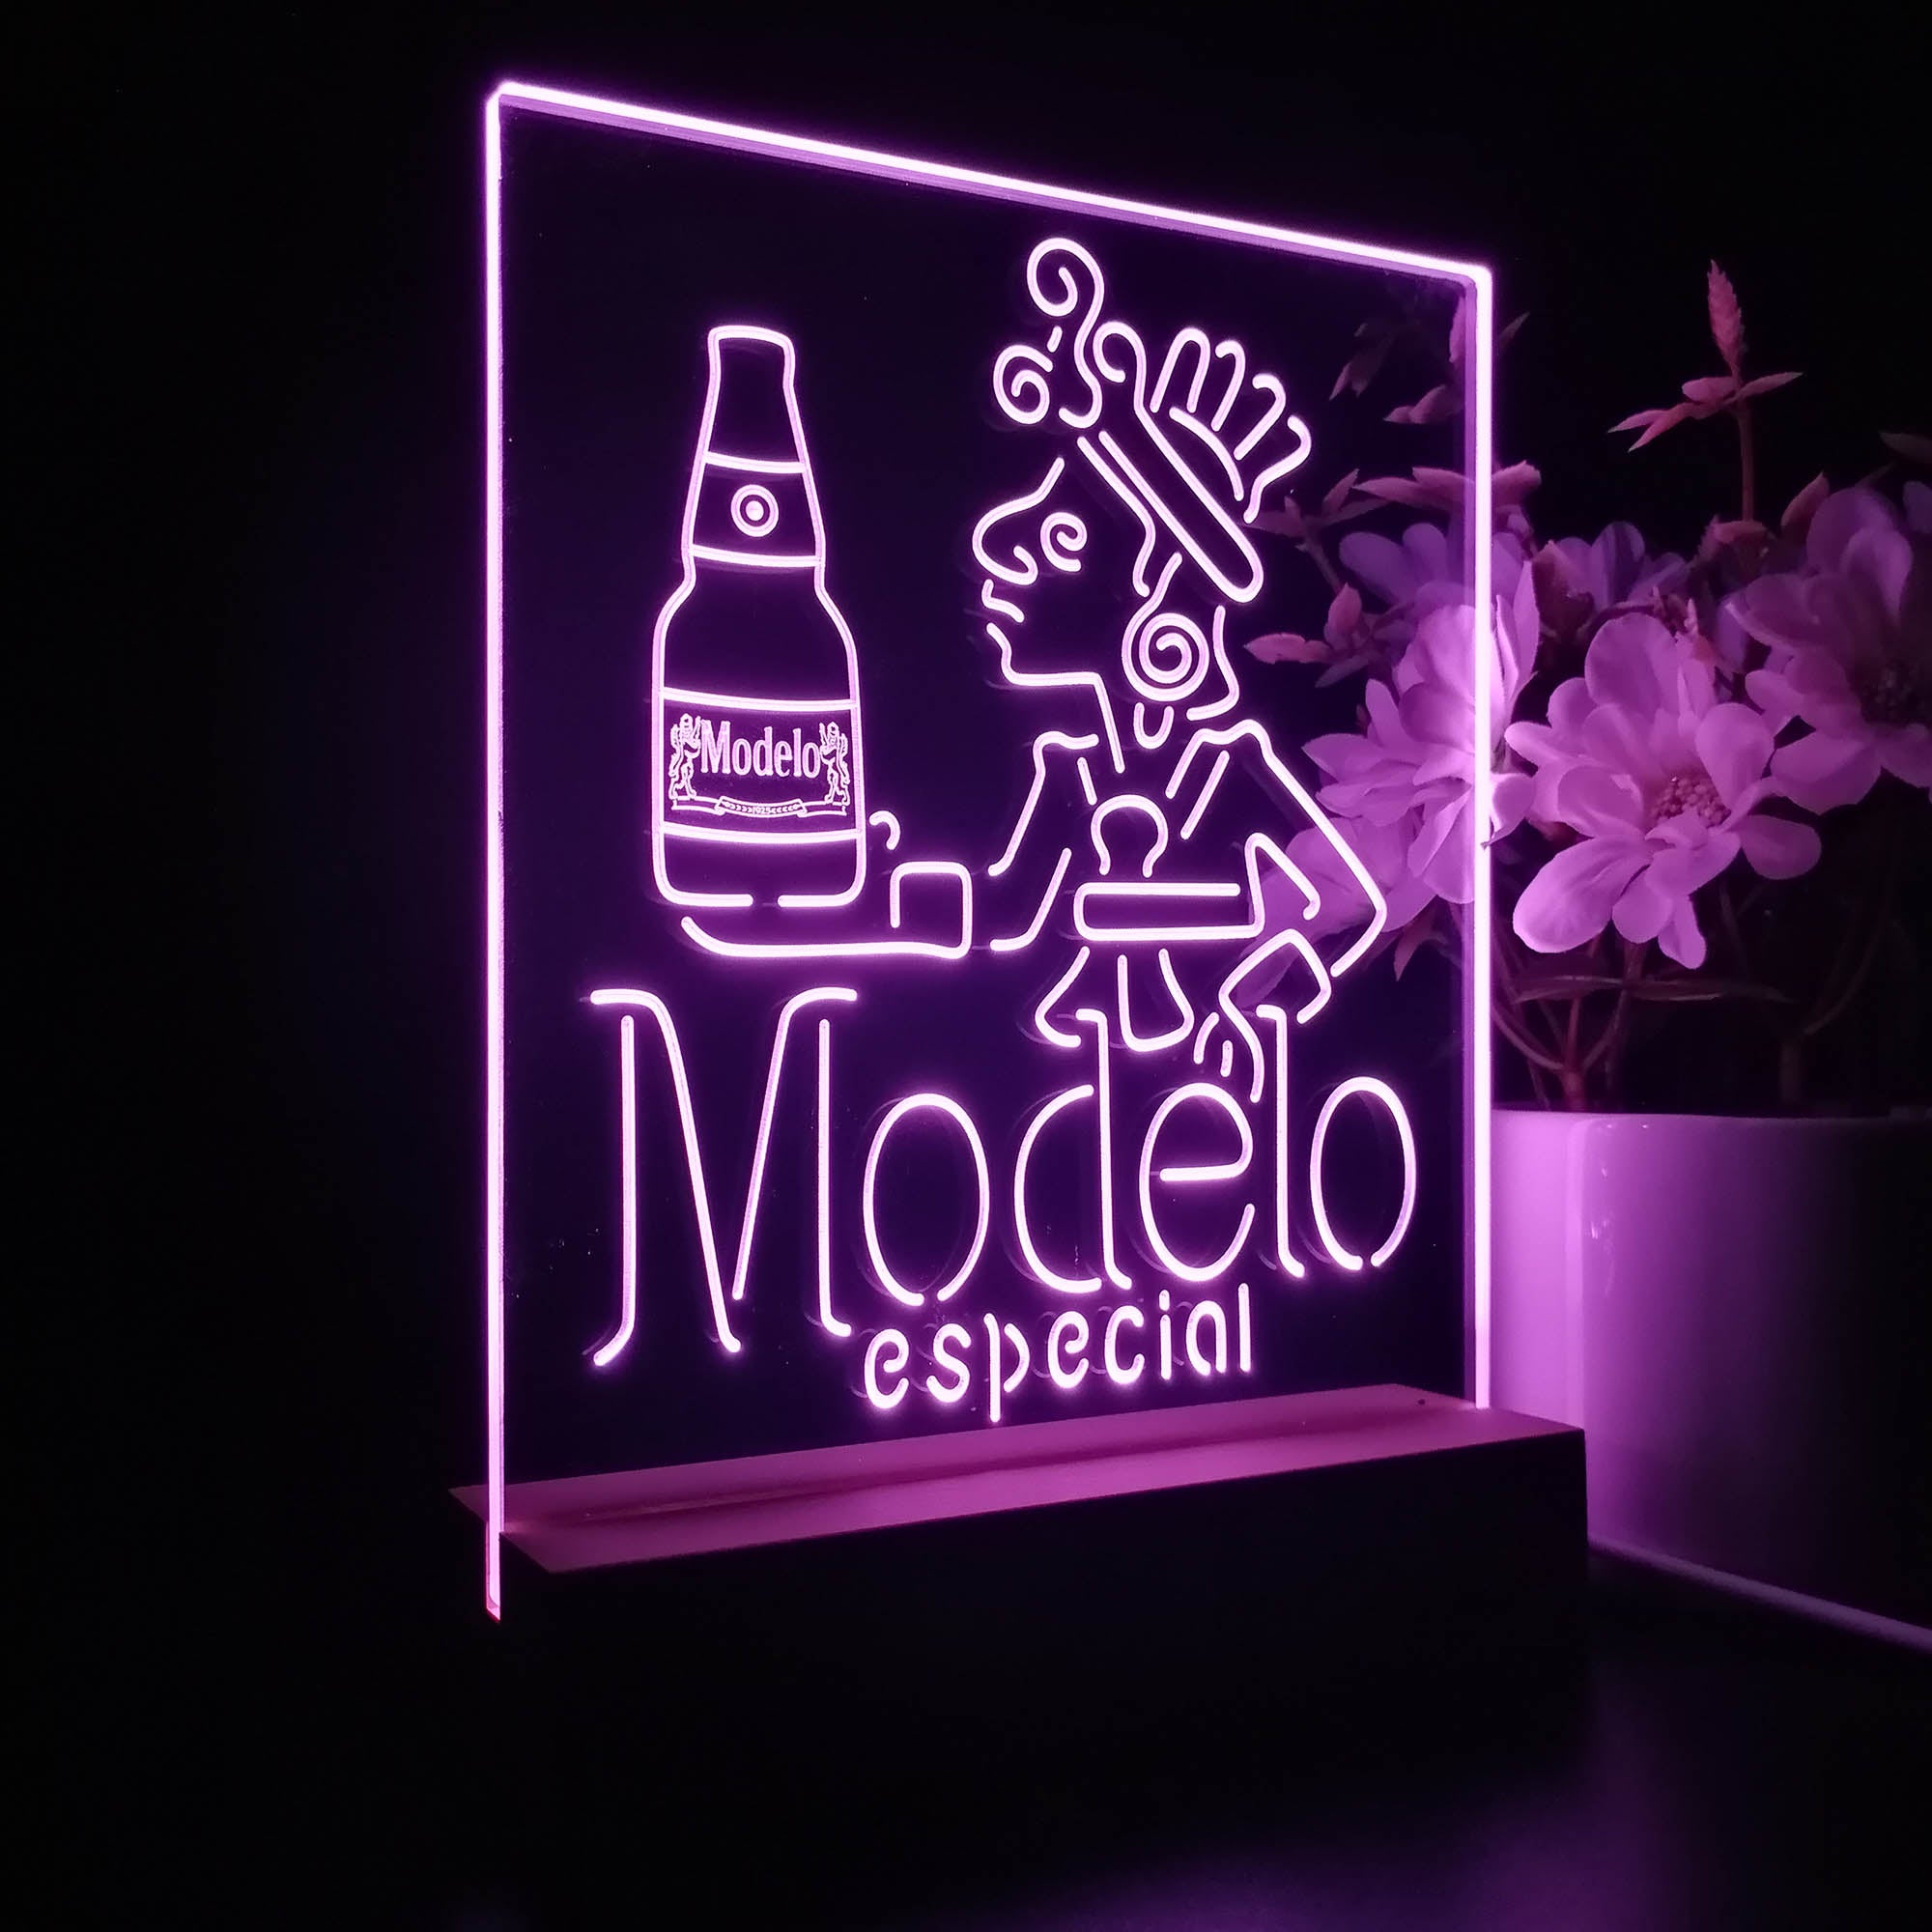 Modelo Especial Adjunct Lager Man Cave 3D LED Optical Illusion Night Light Table Lamp